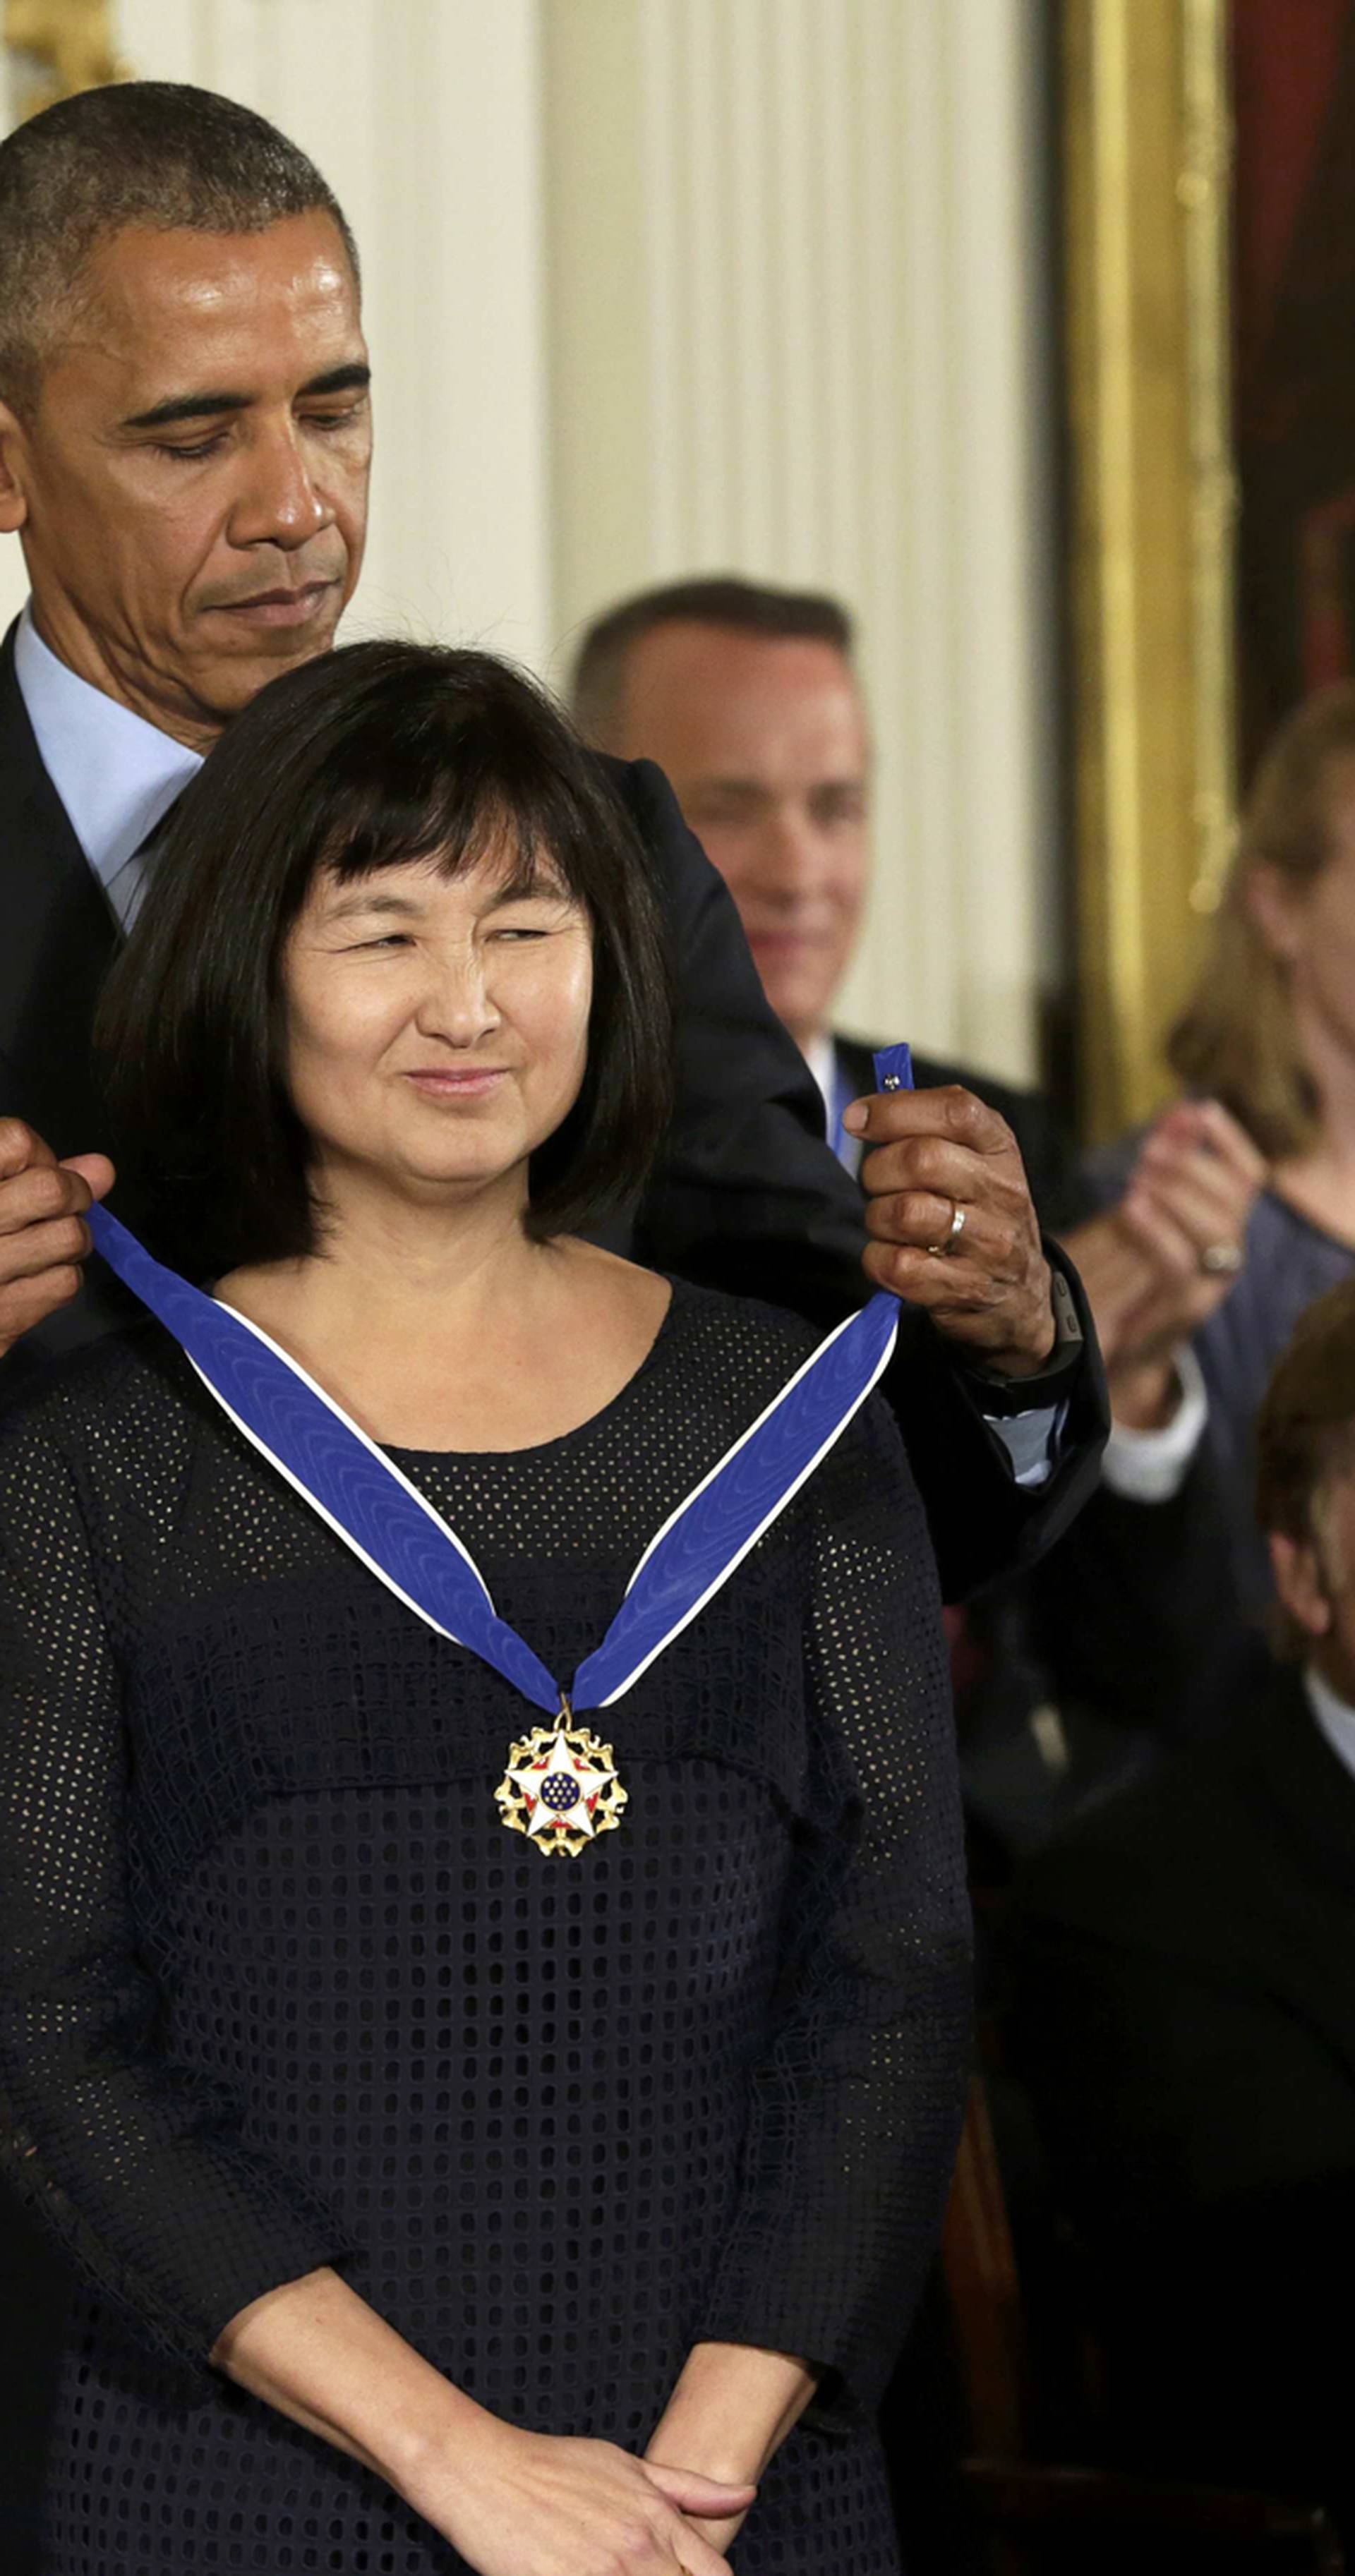 President Obama puts Presidential Medal of Freedom on artist Lin at White House in Washington